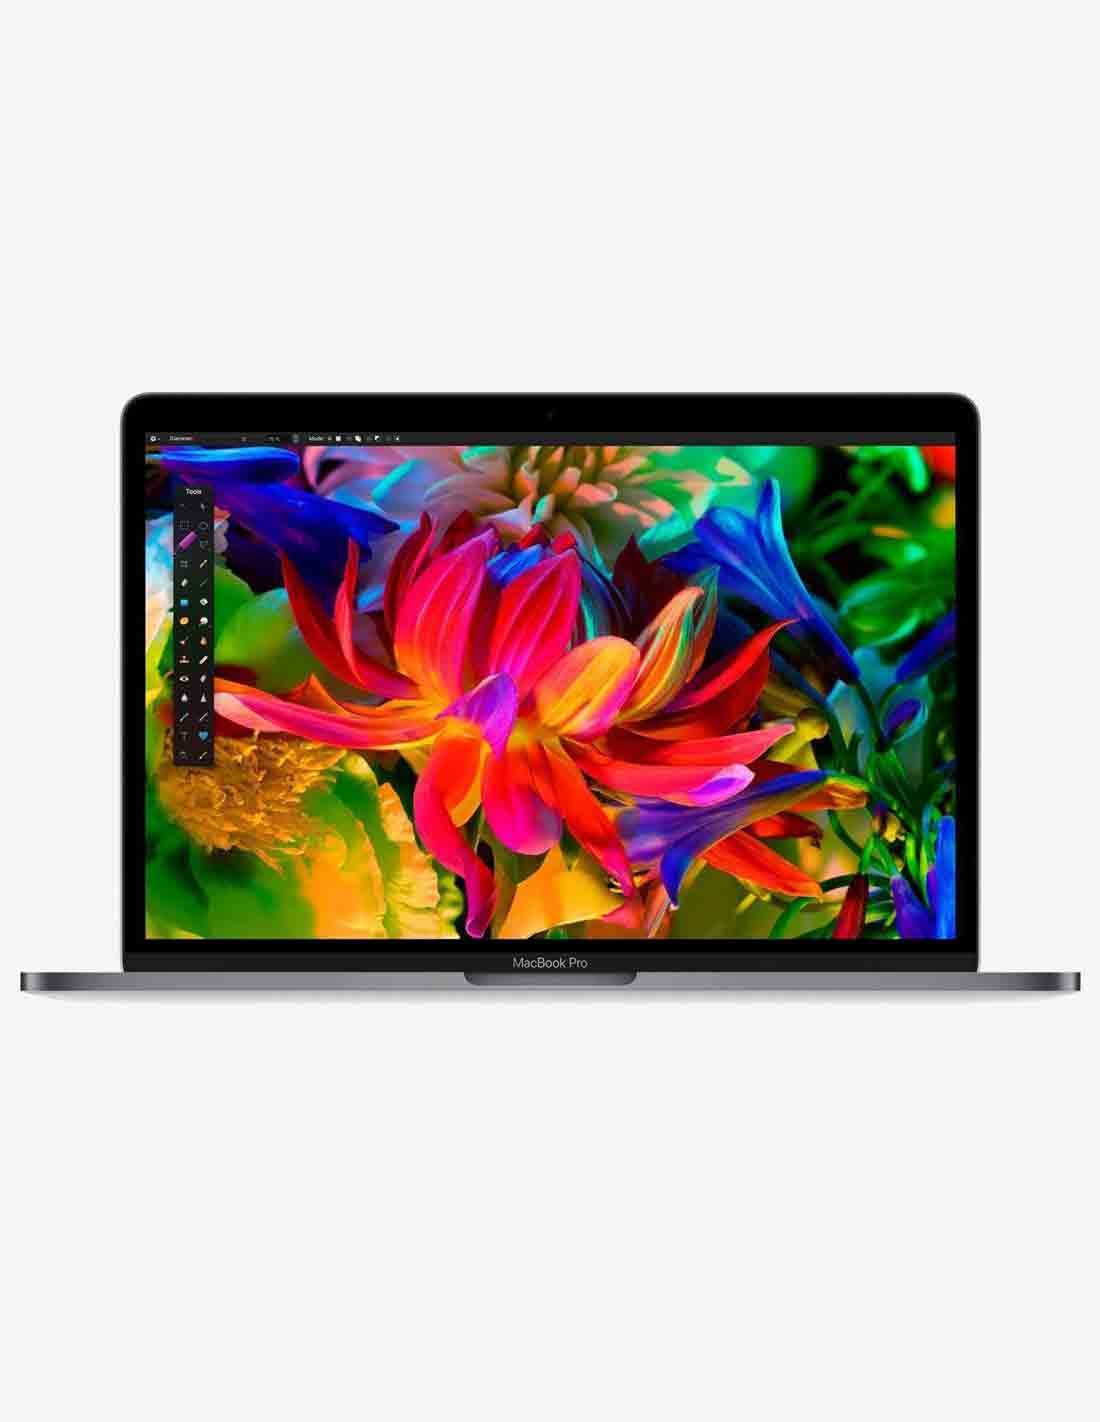 Adorable MacBook Pro 13-inch Space Gray (2017) with best deal options including Cheap Price and Free Delivery in Dubai